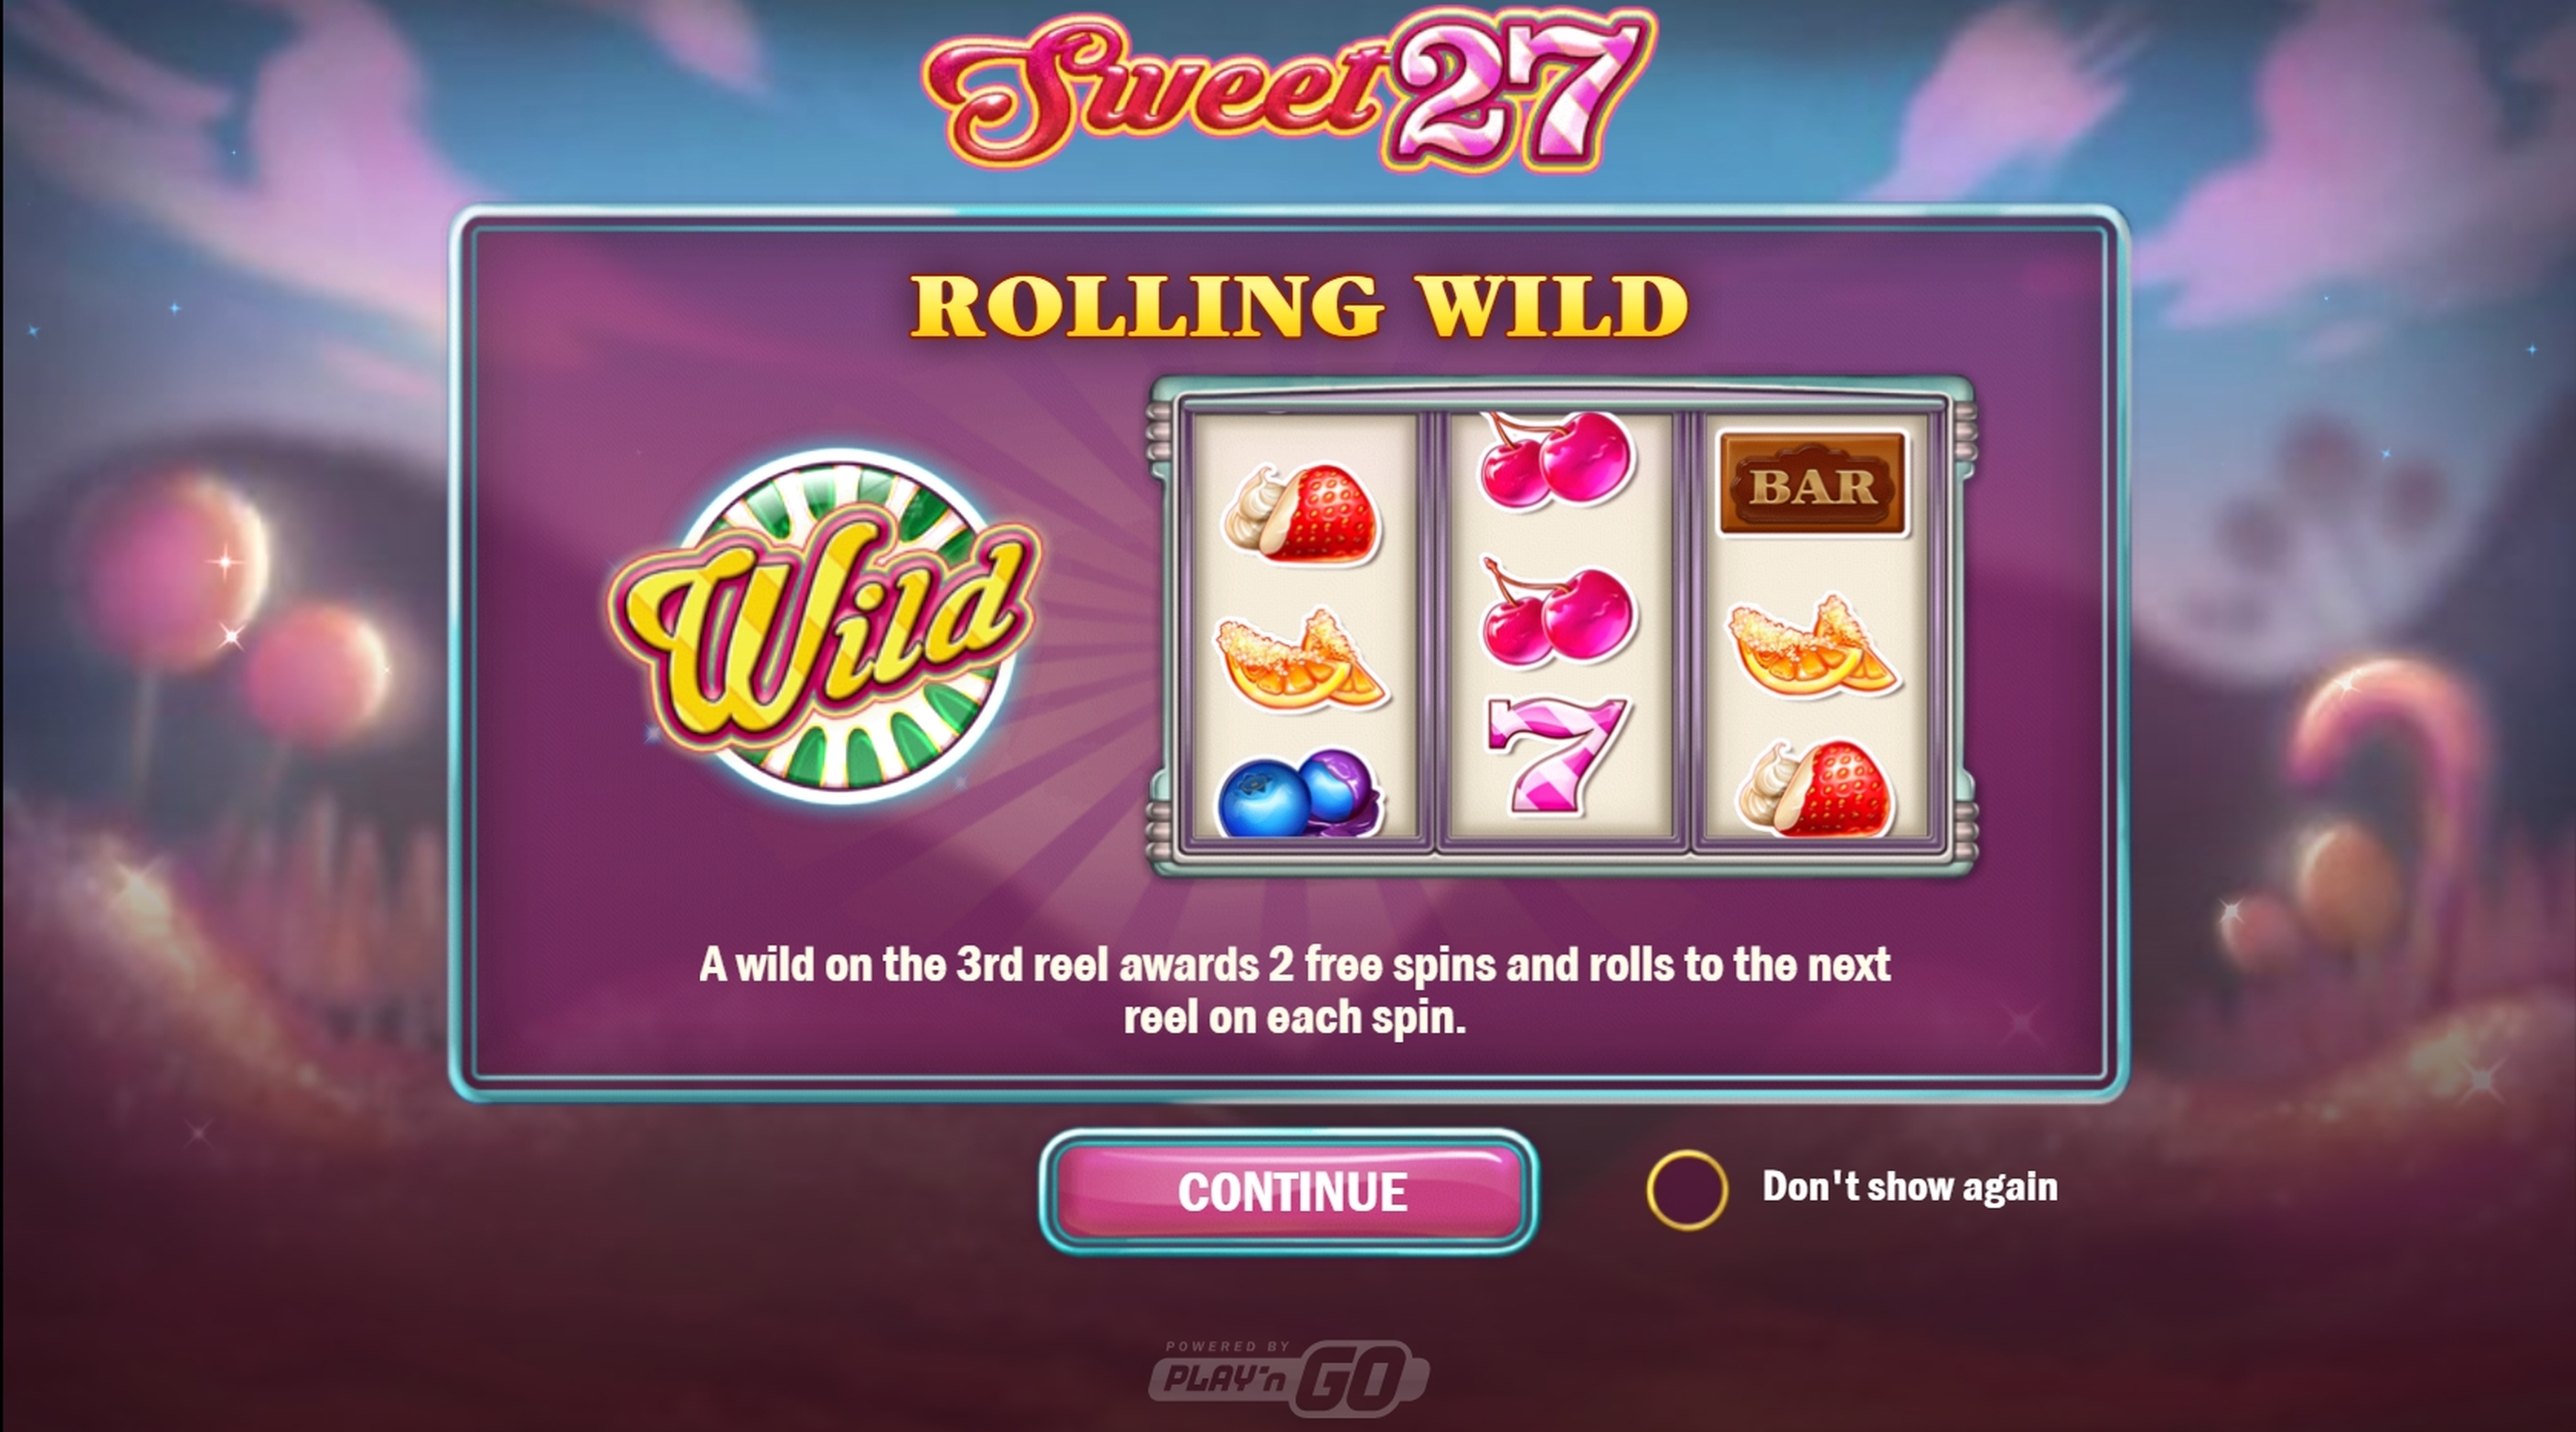 Play Sweet 27 Free Casino Slot Game by Playn GO